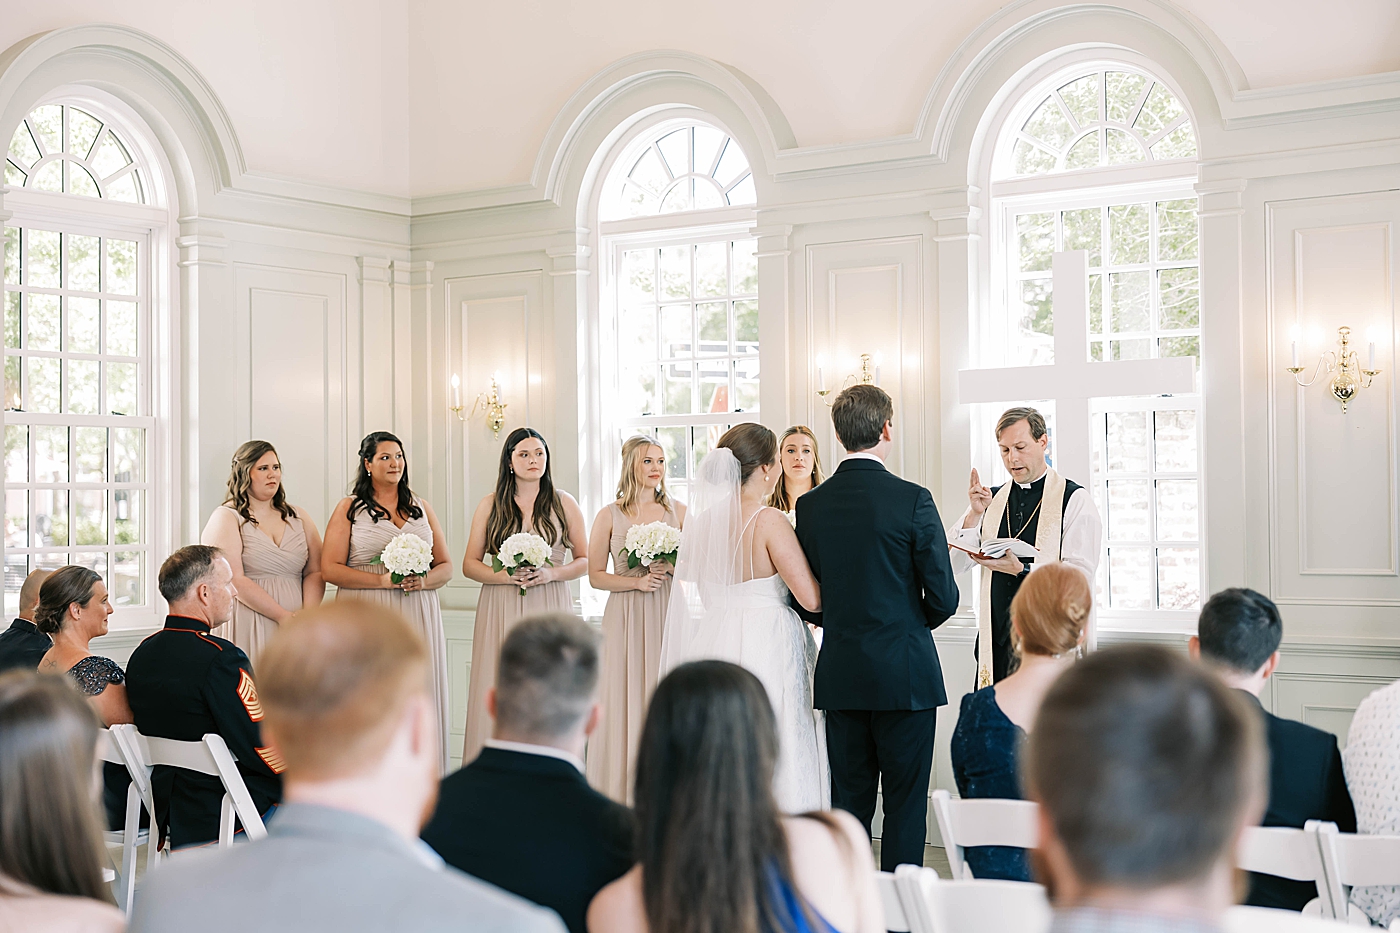 Bride and groom exchange vows during their Intimate spring wedding | Carters Event Co